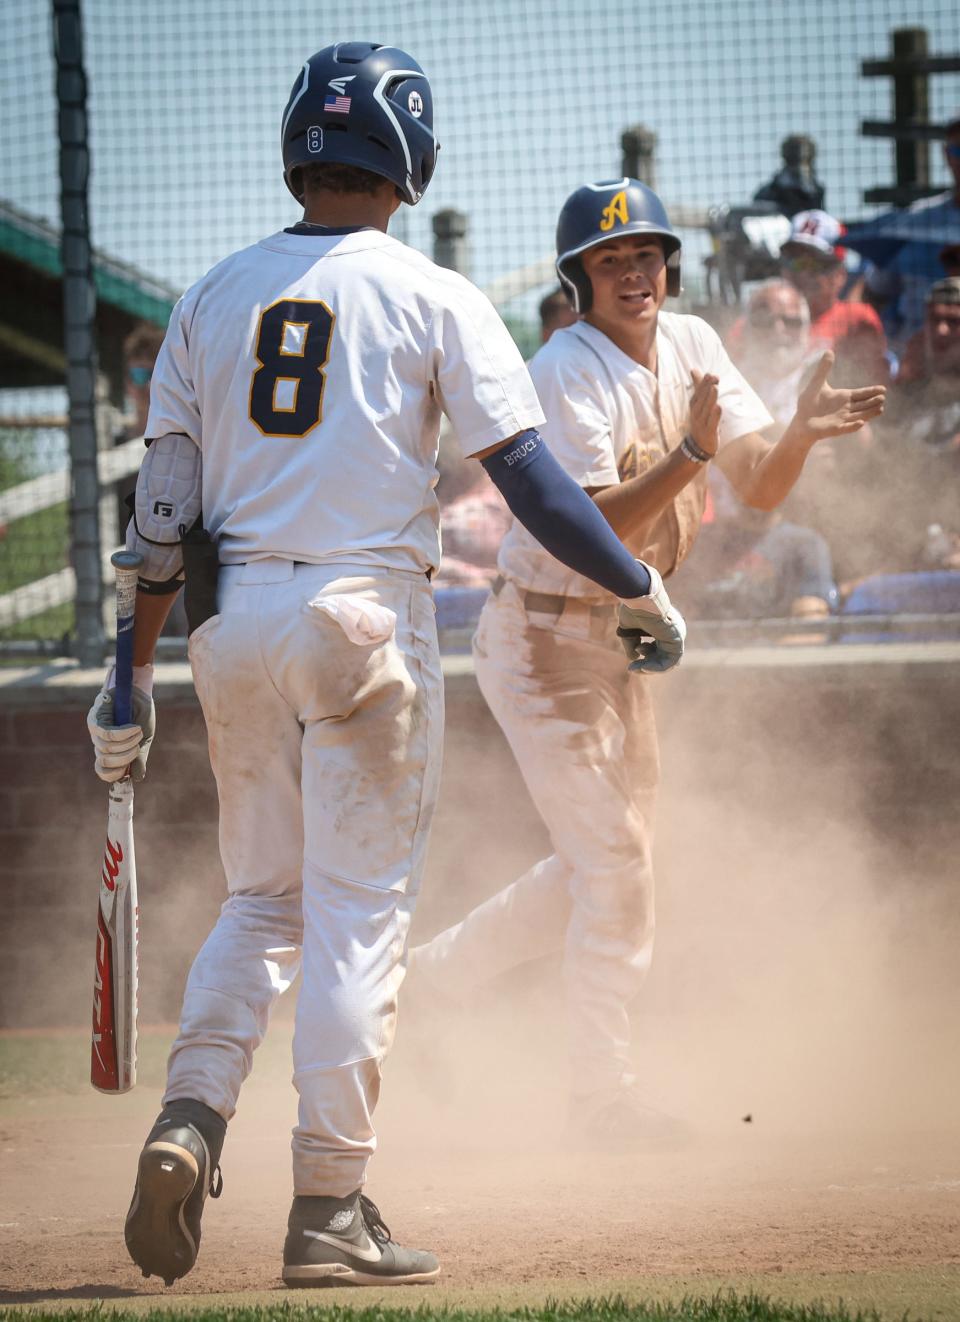 Airport's Jacob VanBuskirk celebrates with teammate Jaden Harper-Lewis after scoring the tying run in the bottom of the third inning against New Boston Huron in the finals of the División 2 District at Airport Saturday. Huron won 4-1 in 10 innings.